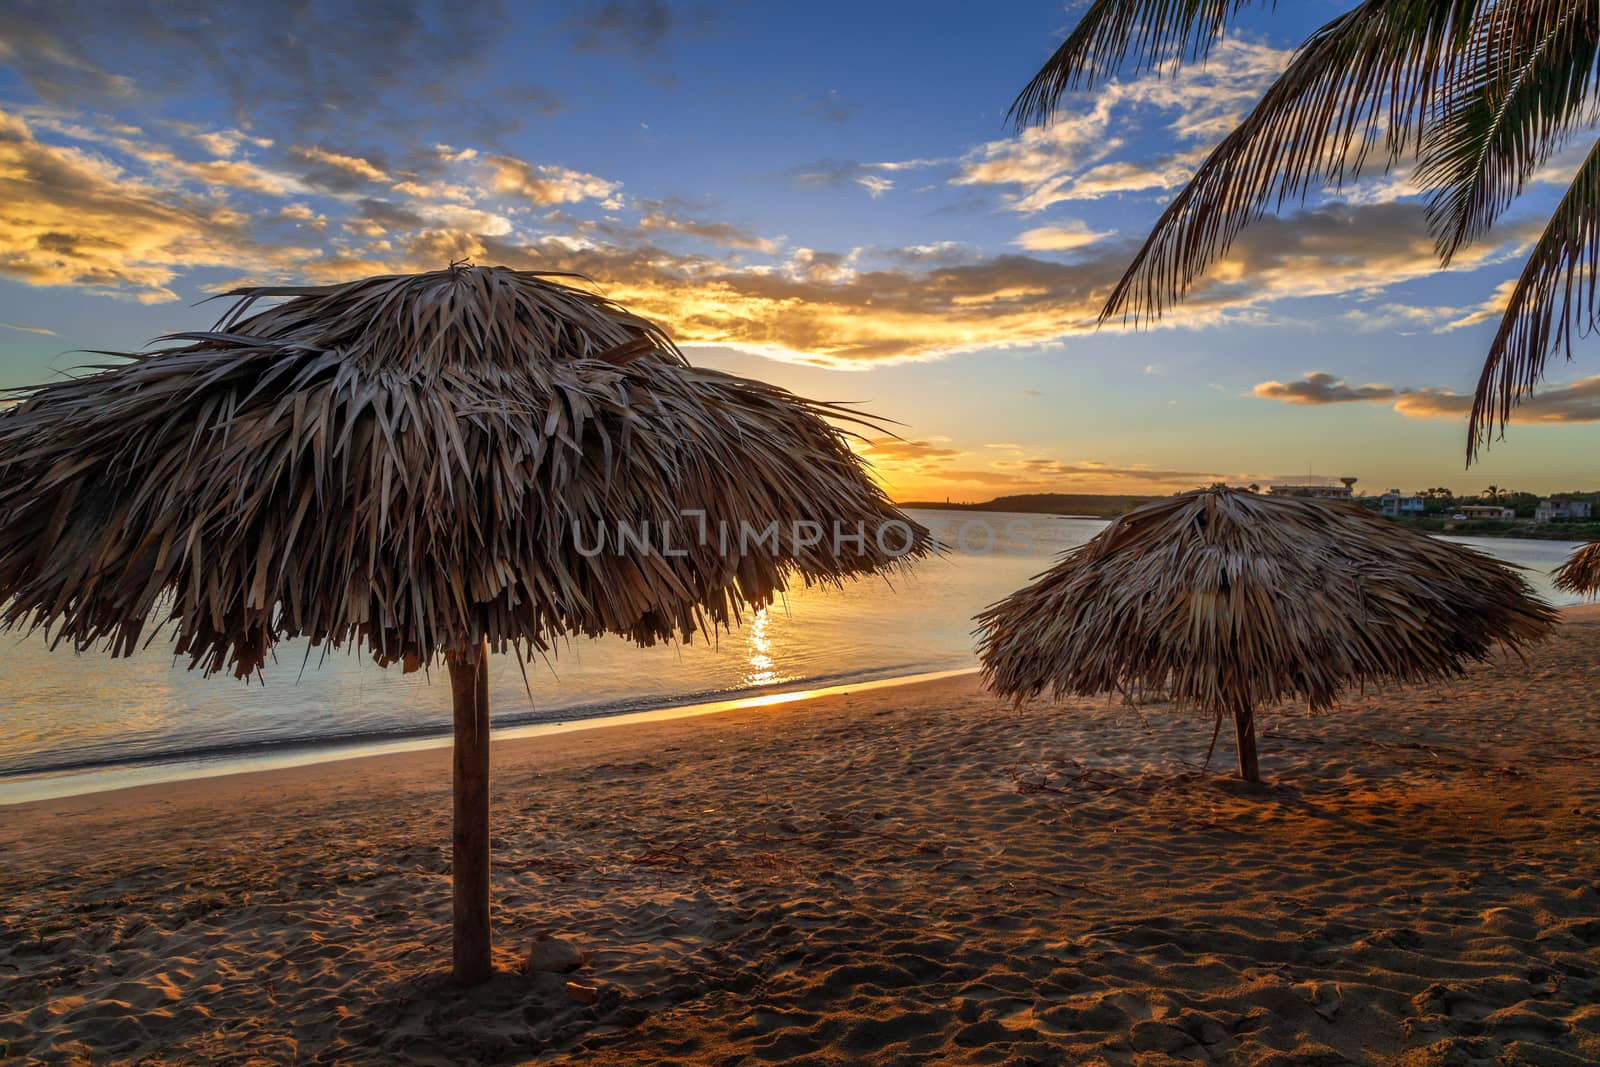 Rancho Luna caribbean beach with palms and straw umbrellas on the shore, sunset view, Cienfuegos, Cuba